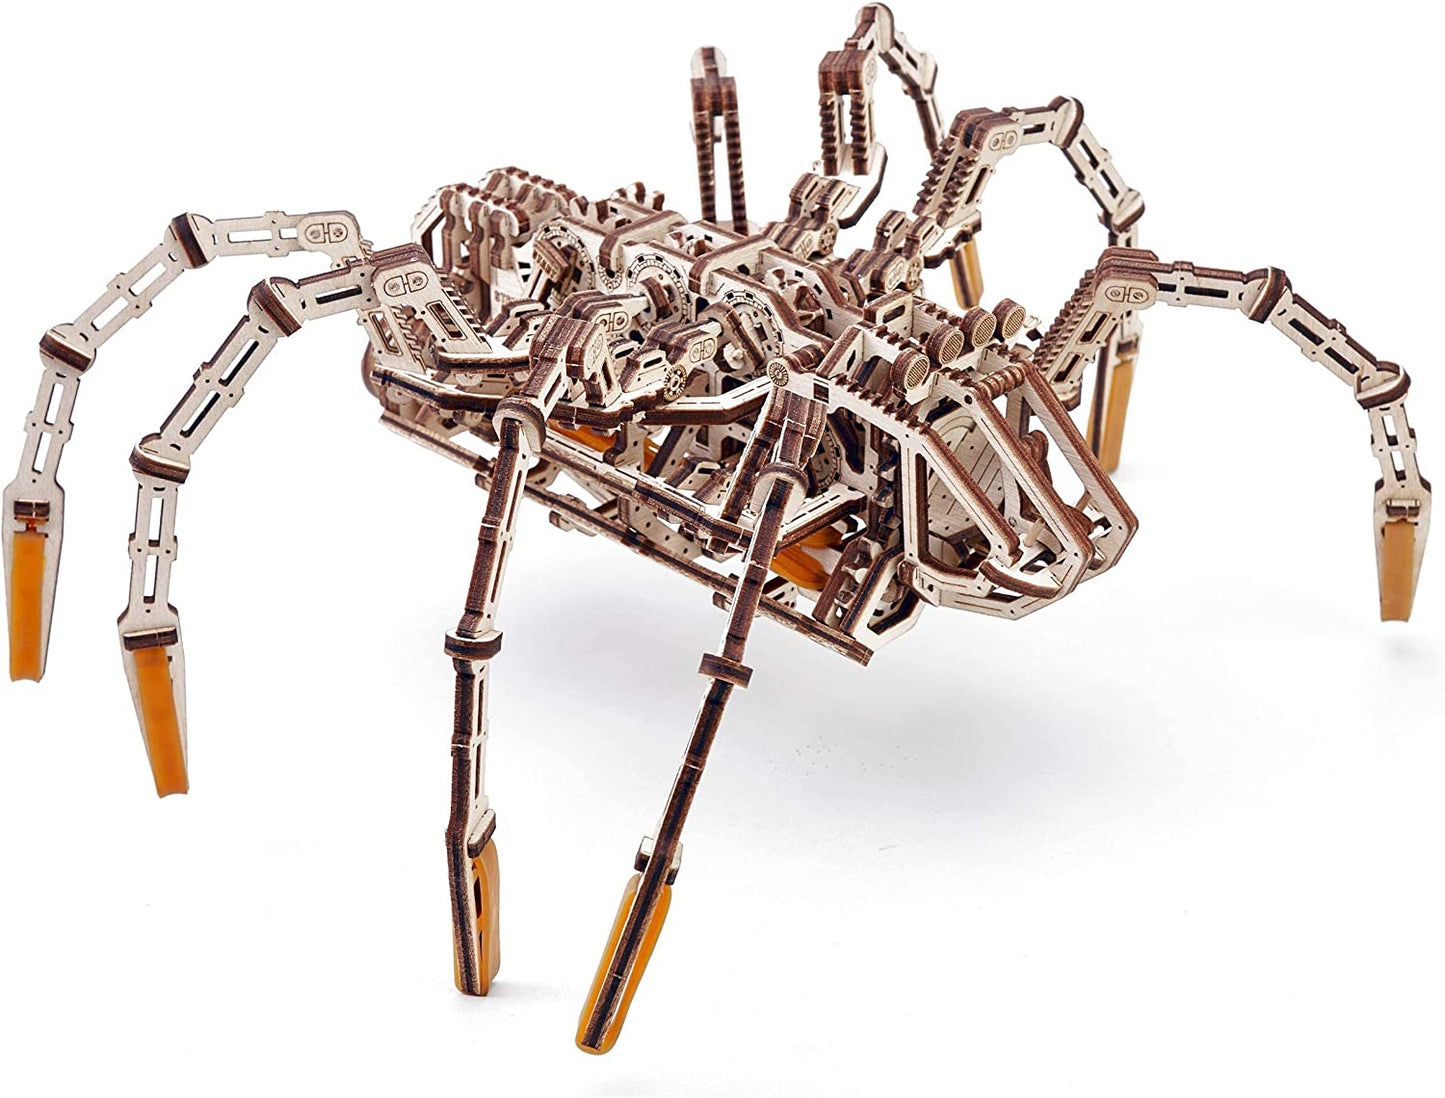 A fully completed 3D wooden spider puzzle kit.